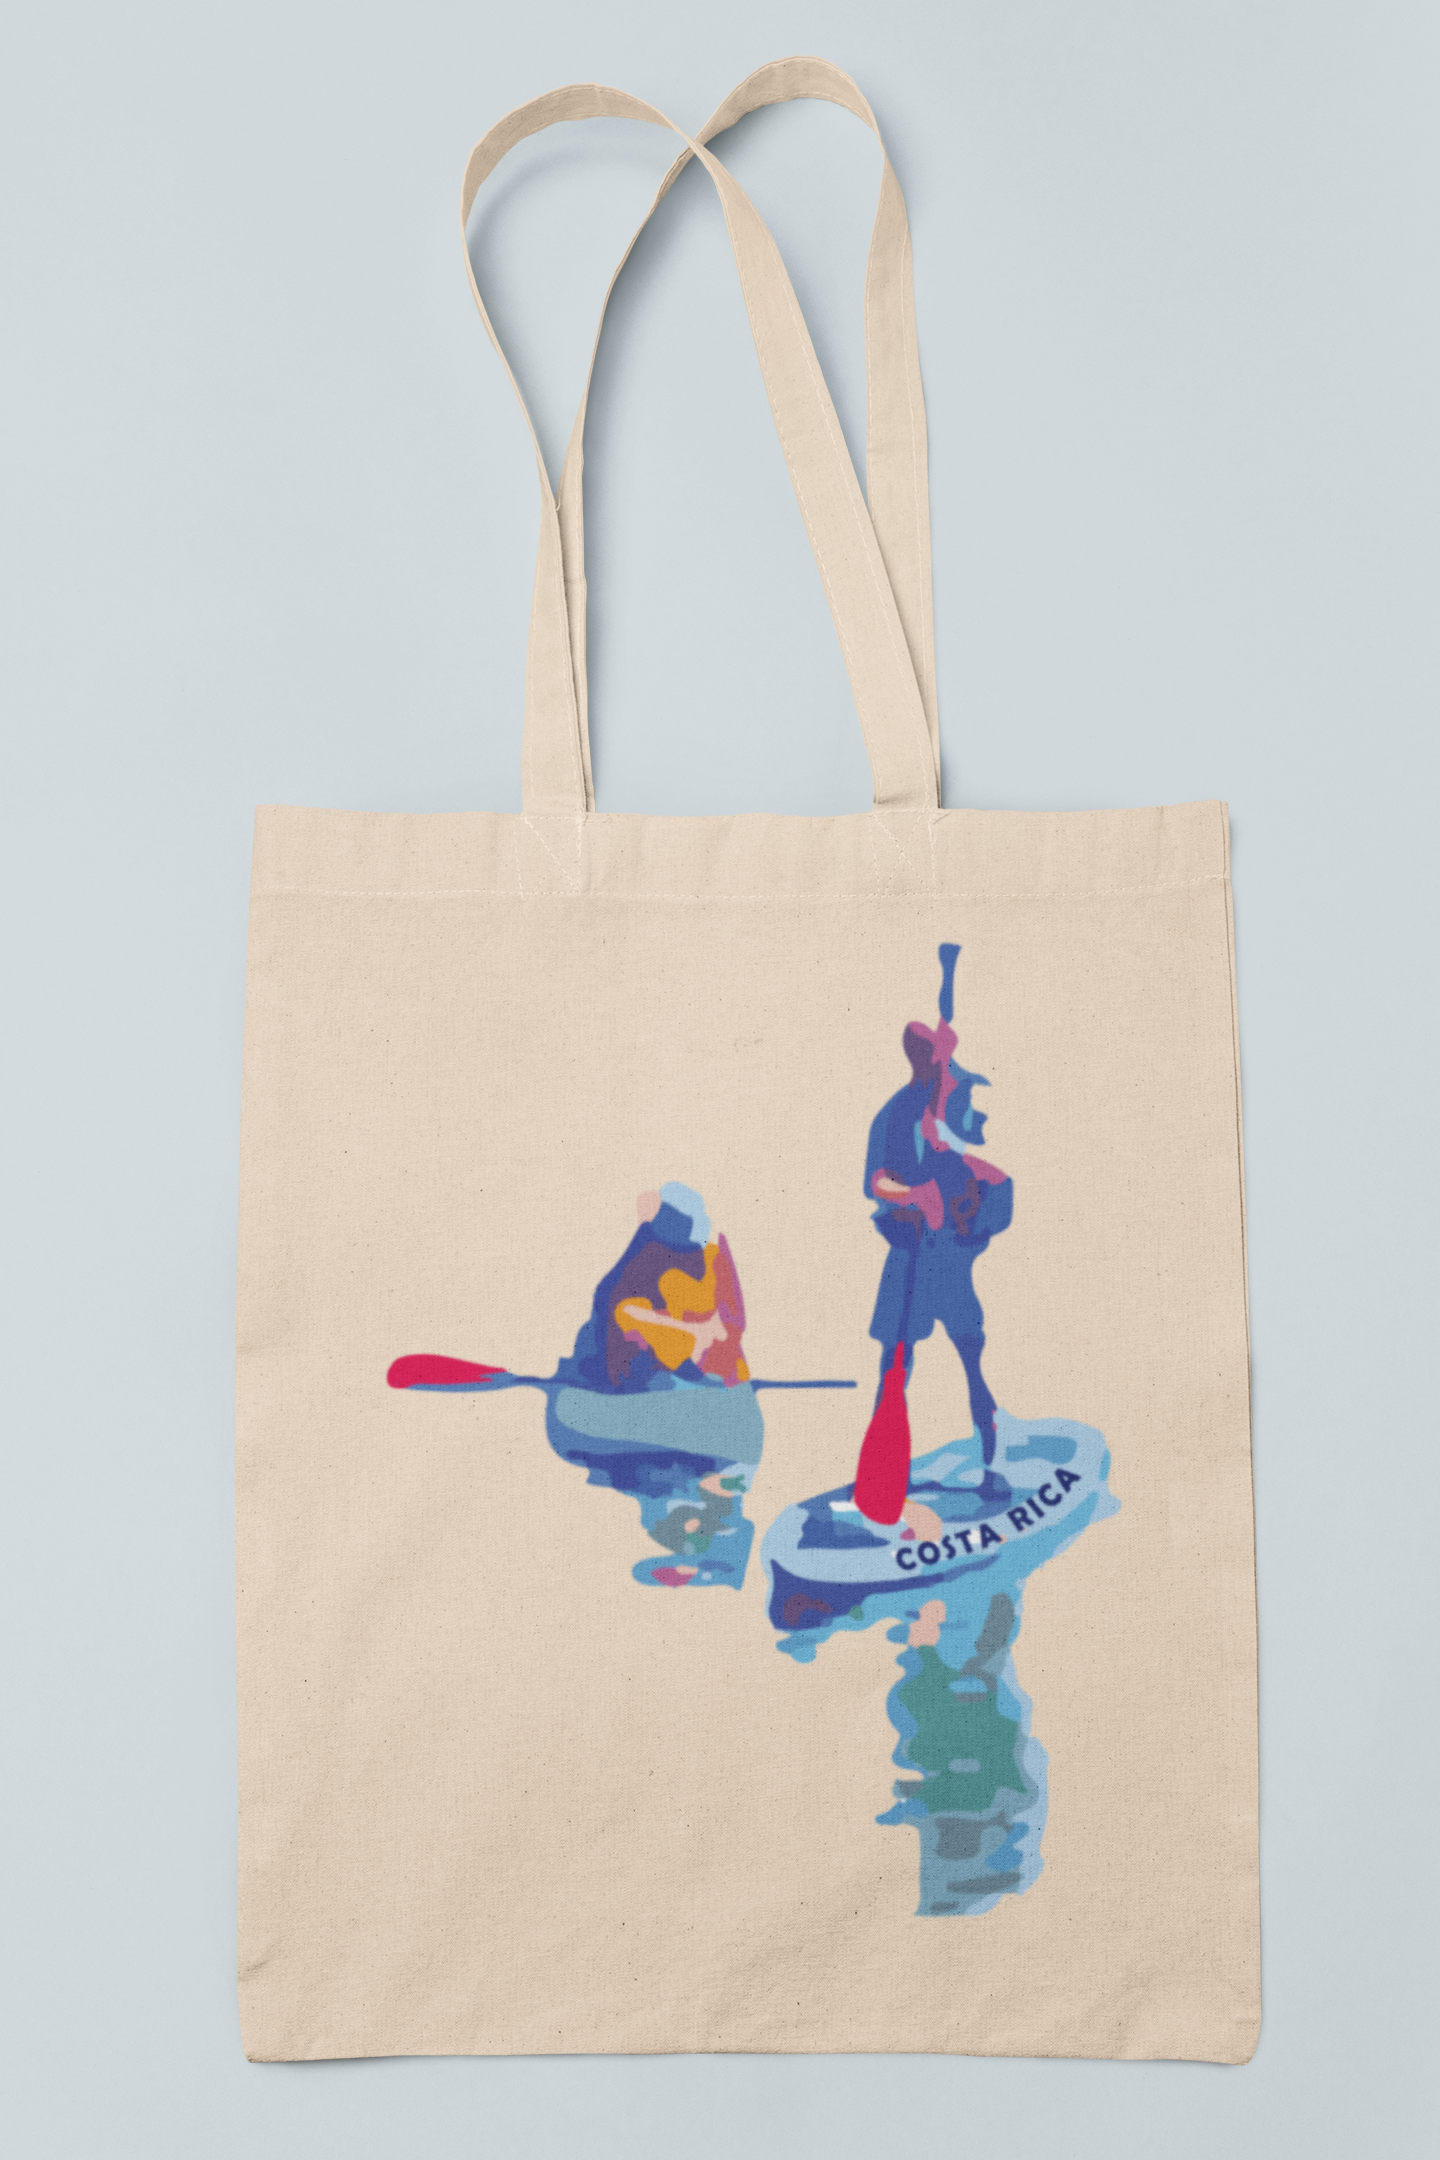 y Costa Rica Souvenir-Kayaking Downloadable file only, Digital Product